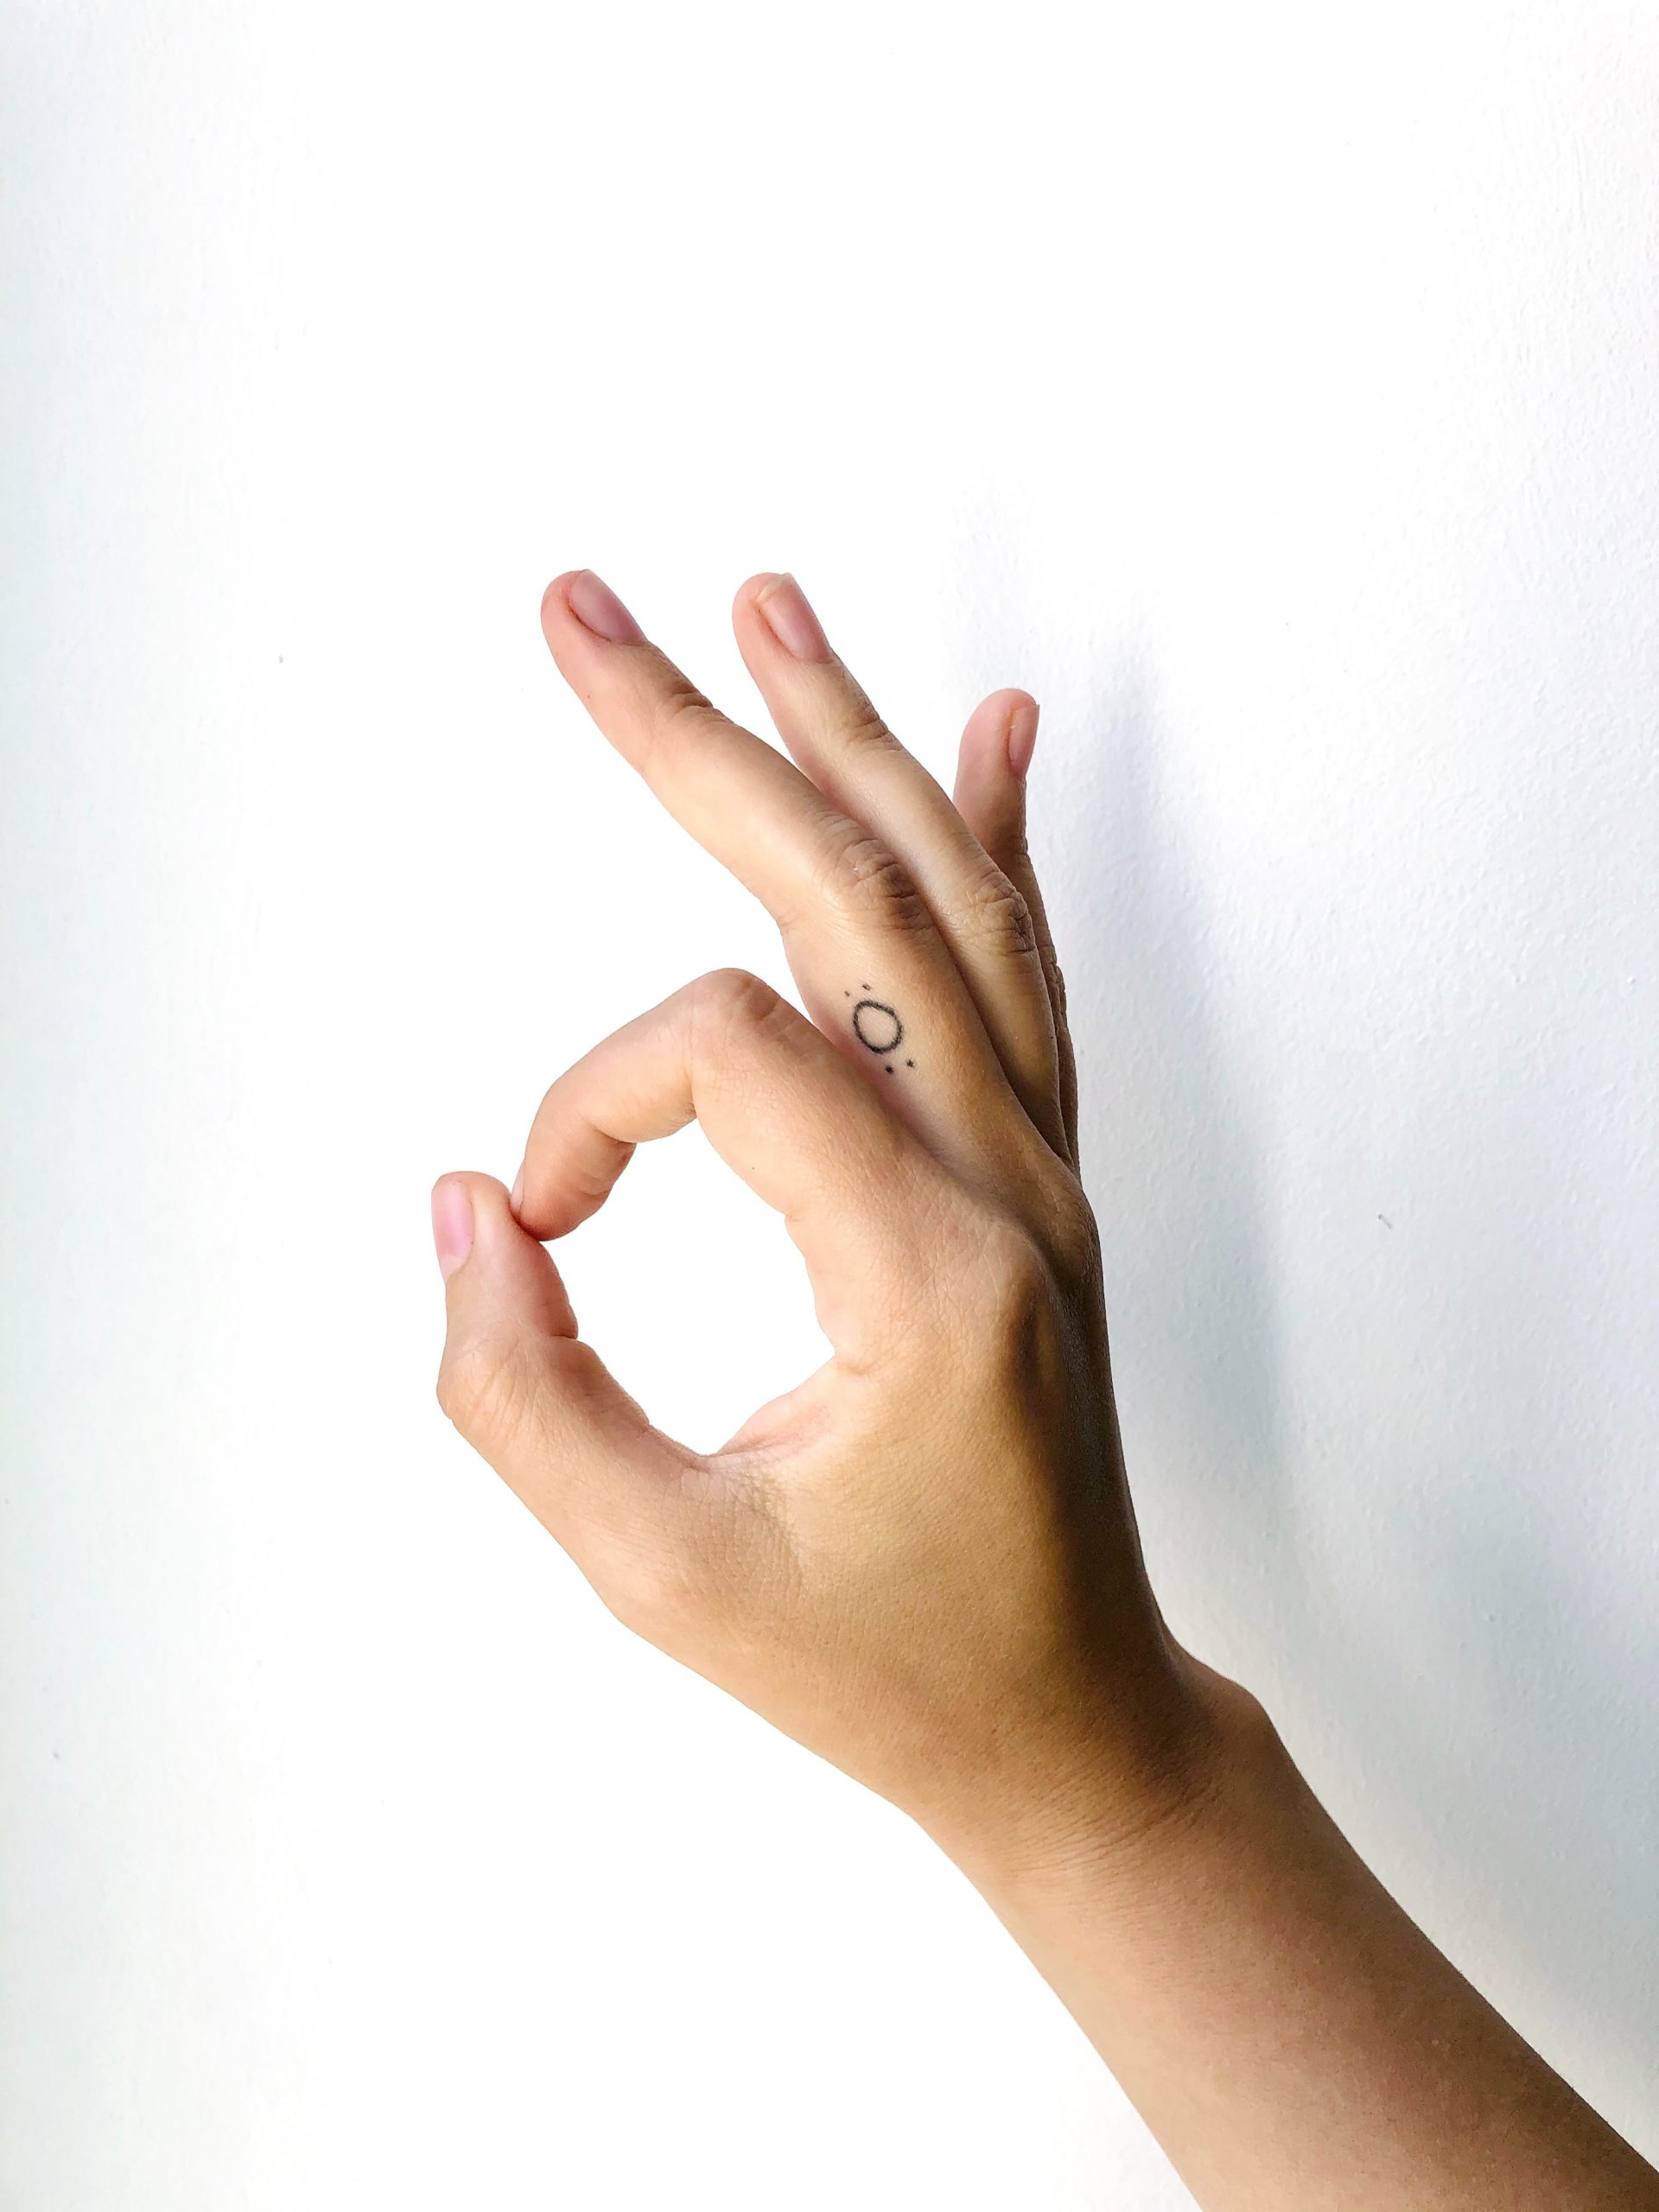 Photograph of a hand against a white background holding the OK hand sign.